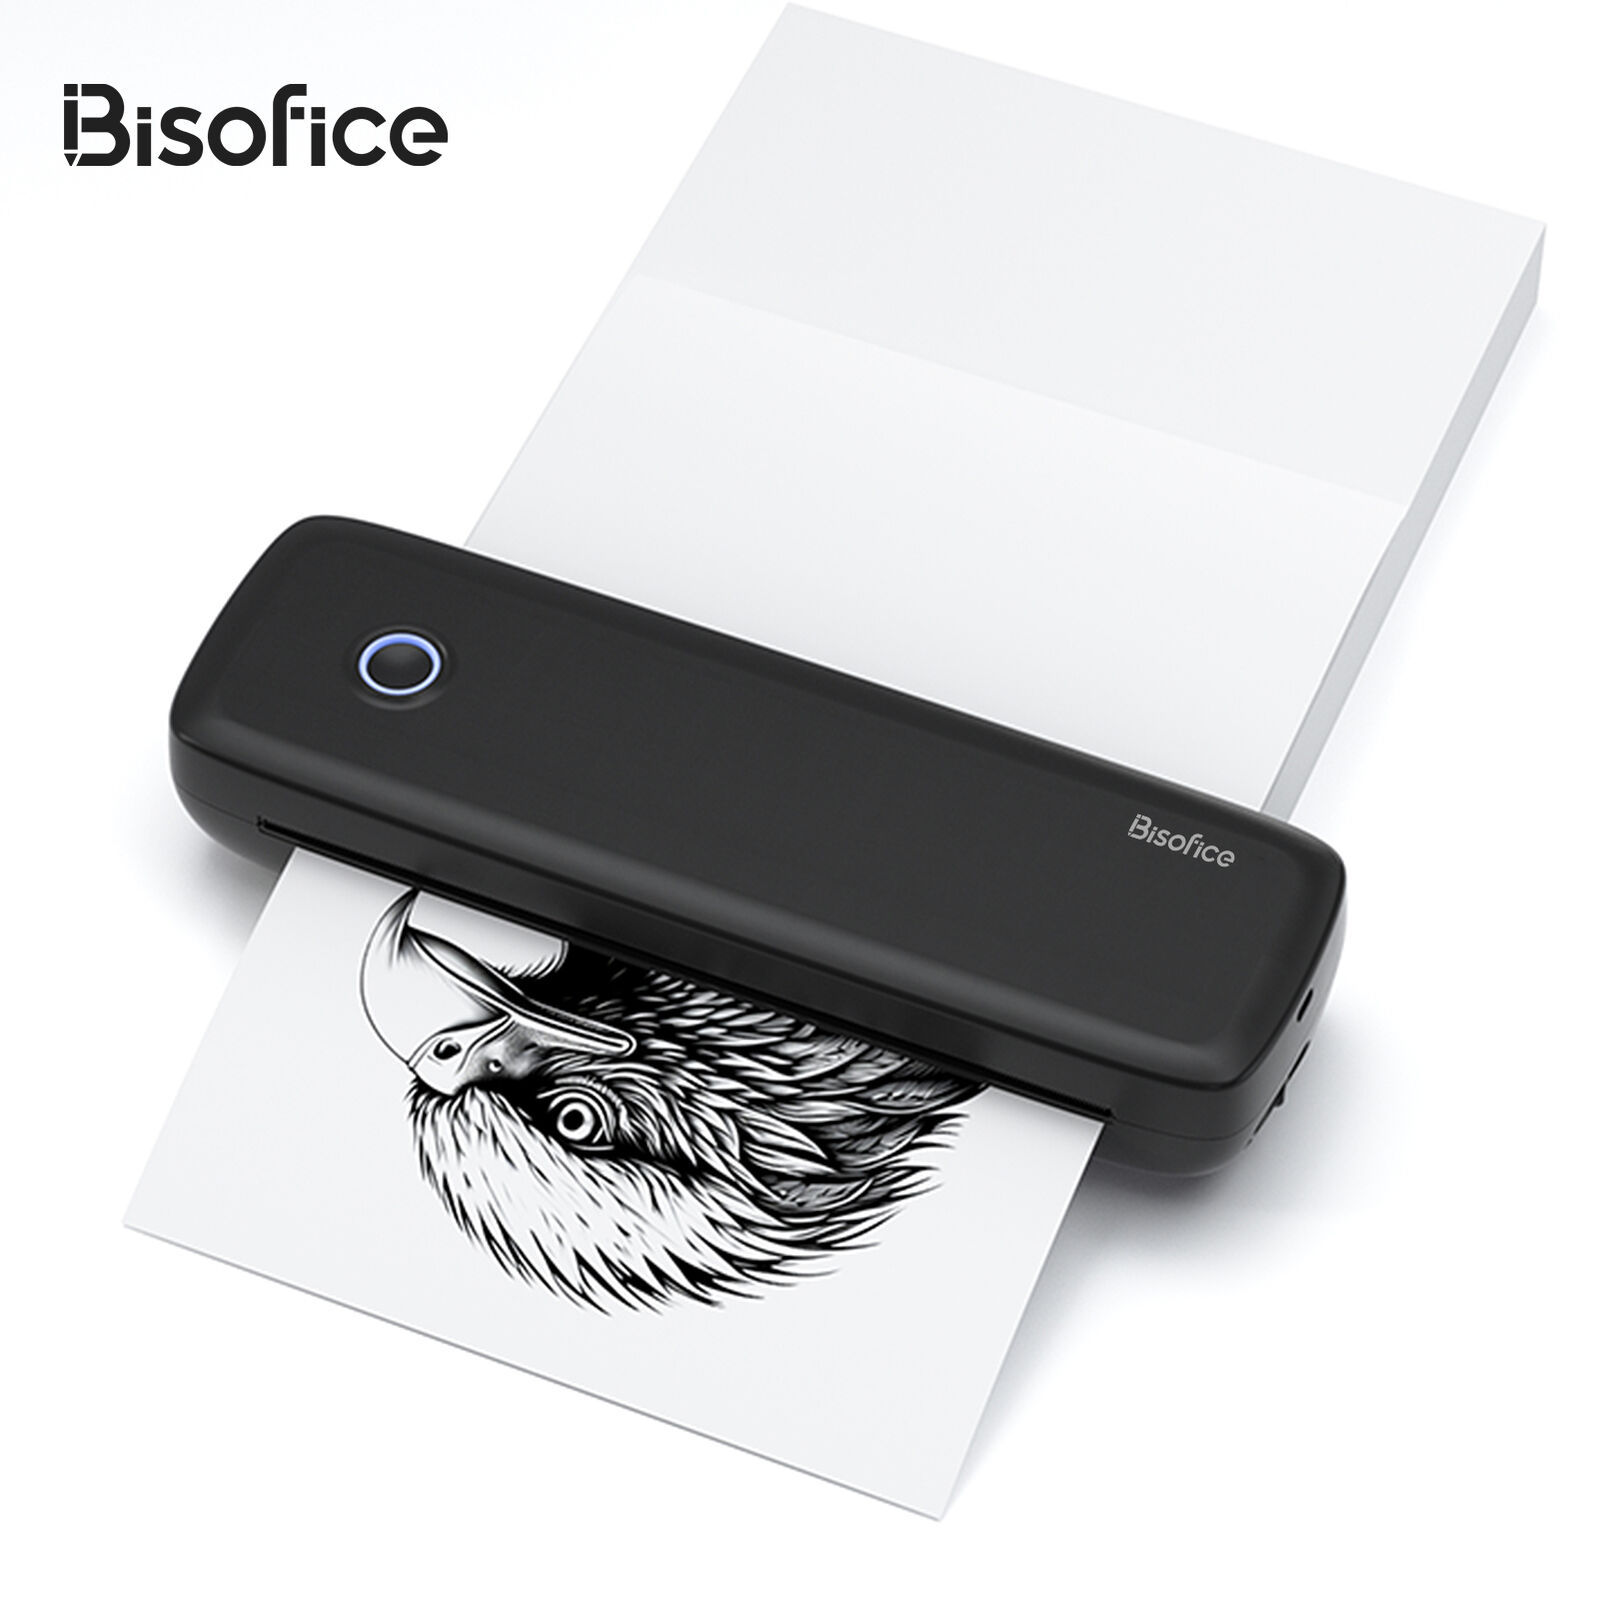 Bisofice A4 Portable Thermal Transfer Printer Wireless&USB 56mm/77mm/107mm C7Y4